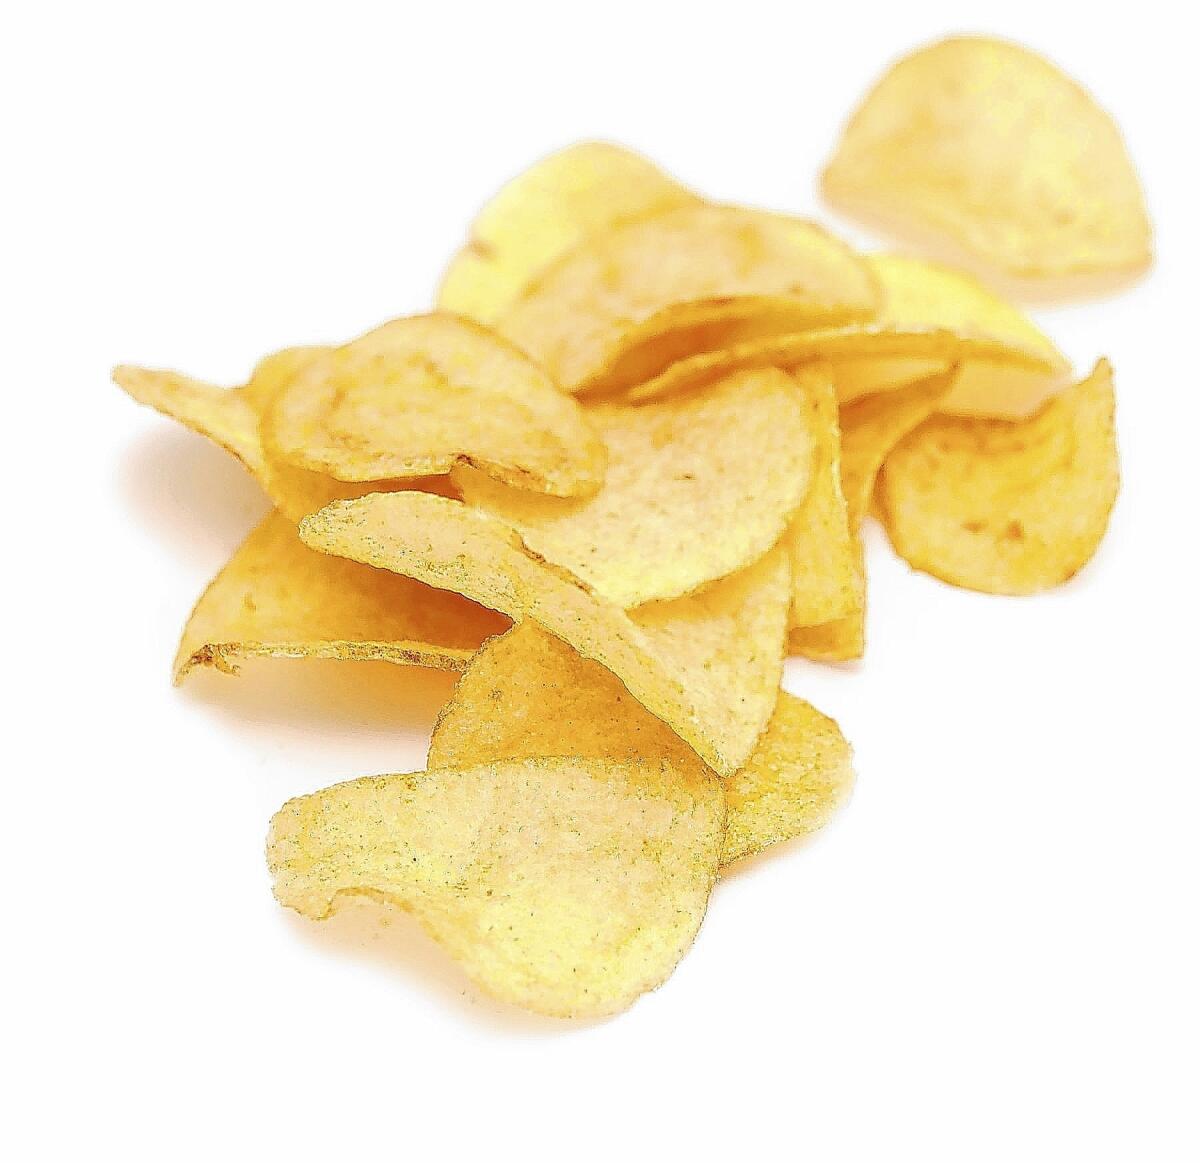 If you think eating potato chips will make you feel better, stop and think how the whole process actually does make you feel.